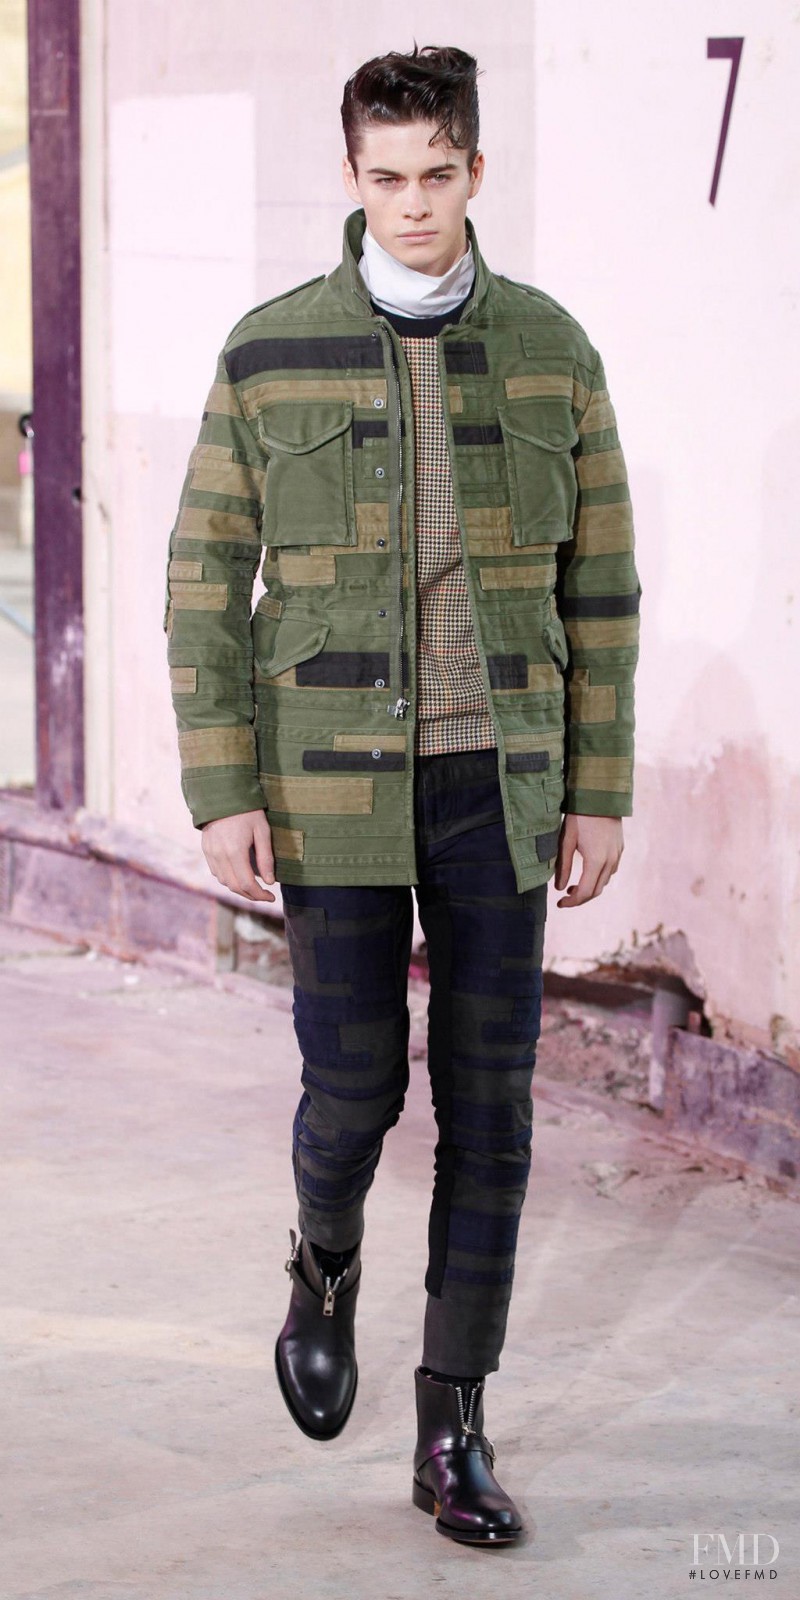 Joe Collier featured in  the 3.1 Phillip Lim fashion show for Autumn/Winter 2013